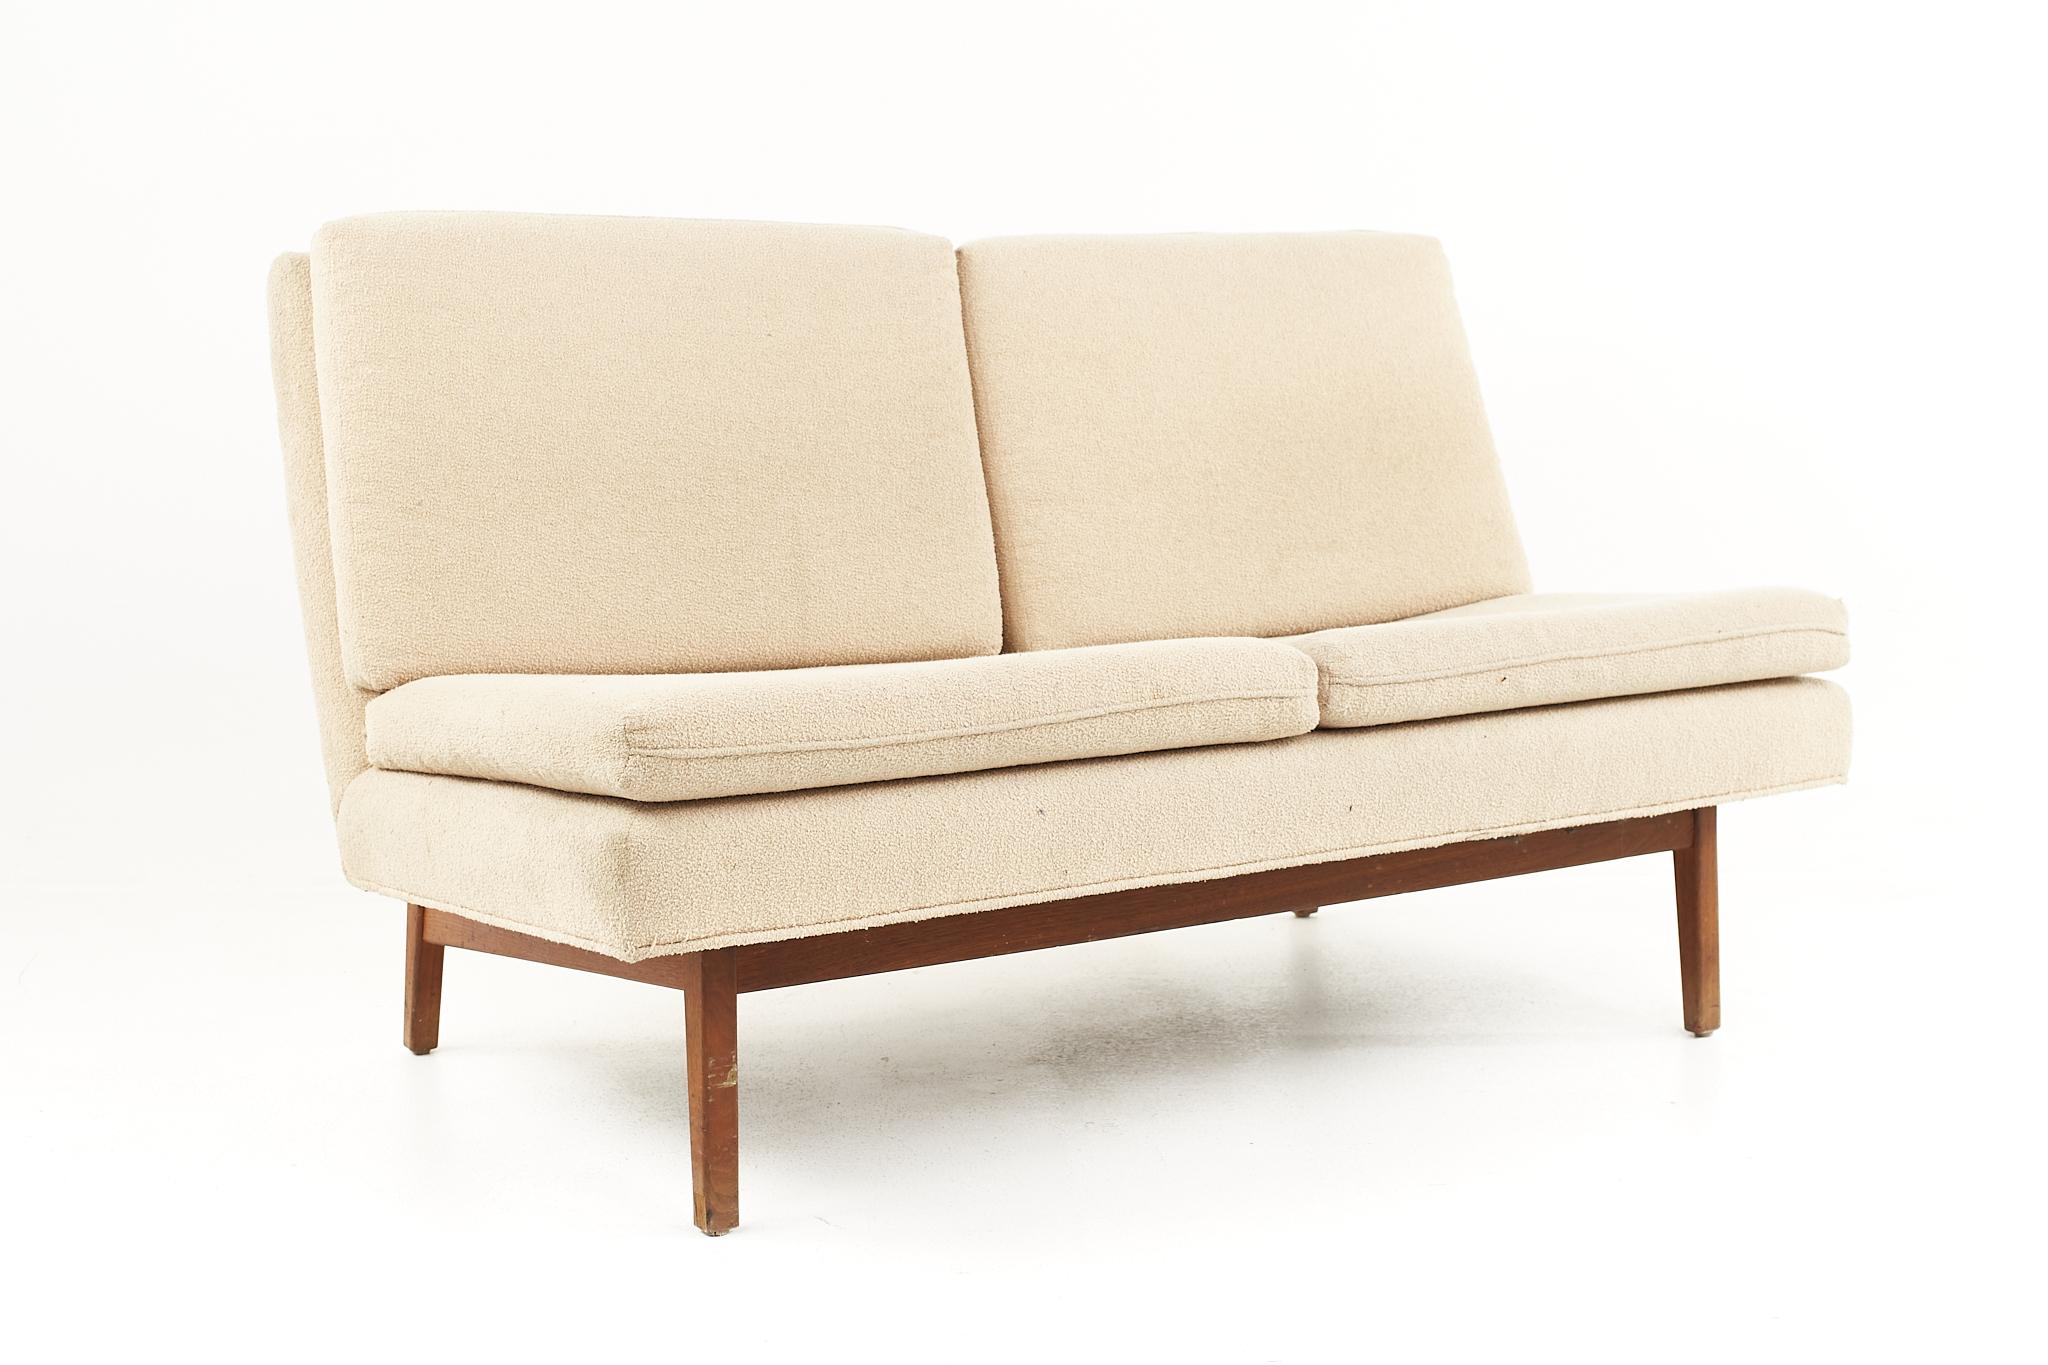 American Jack Cartwright for Founders Mid-Century Walnut Bracket Sofas, a Pair